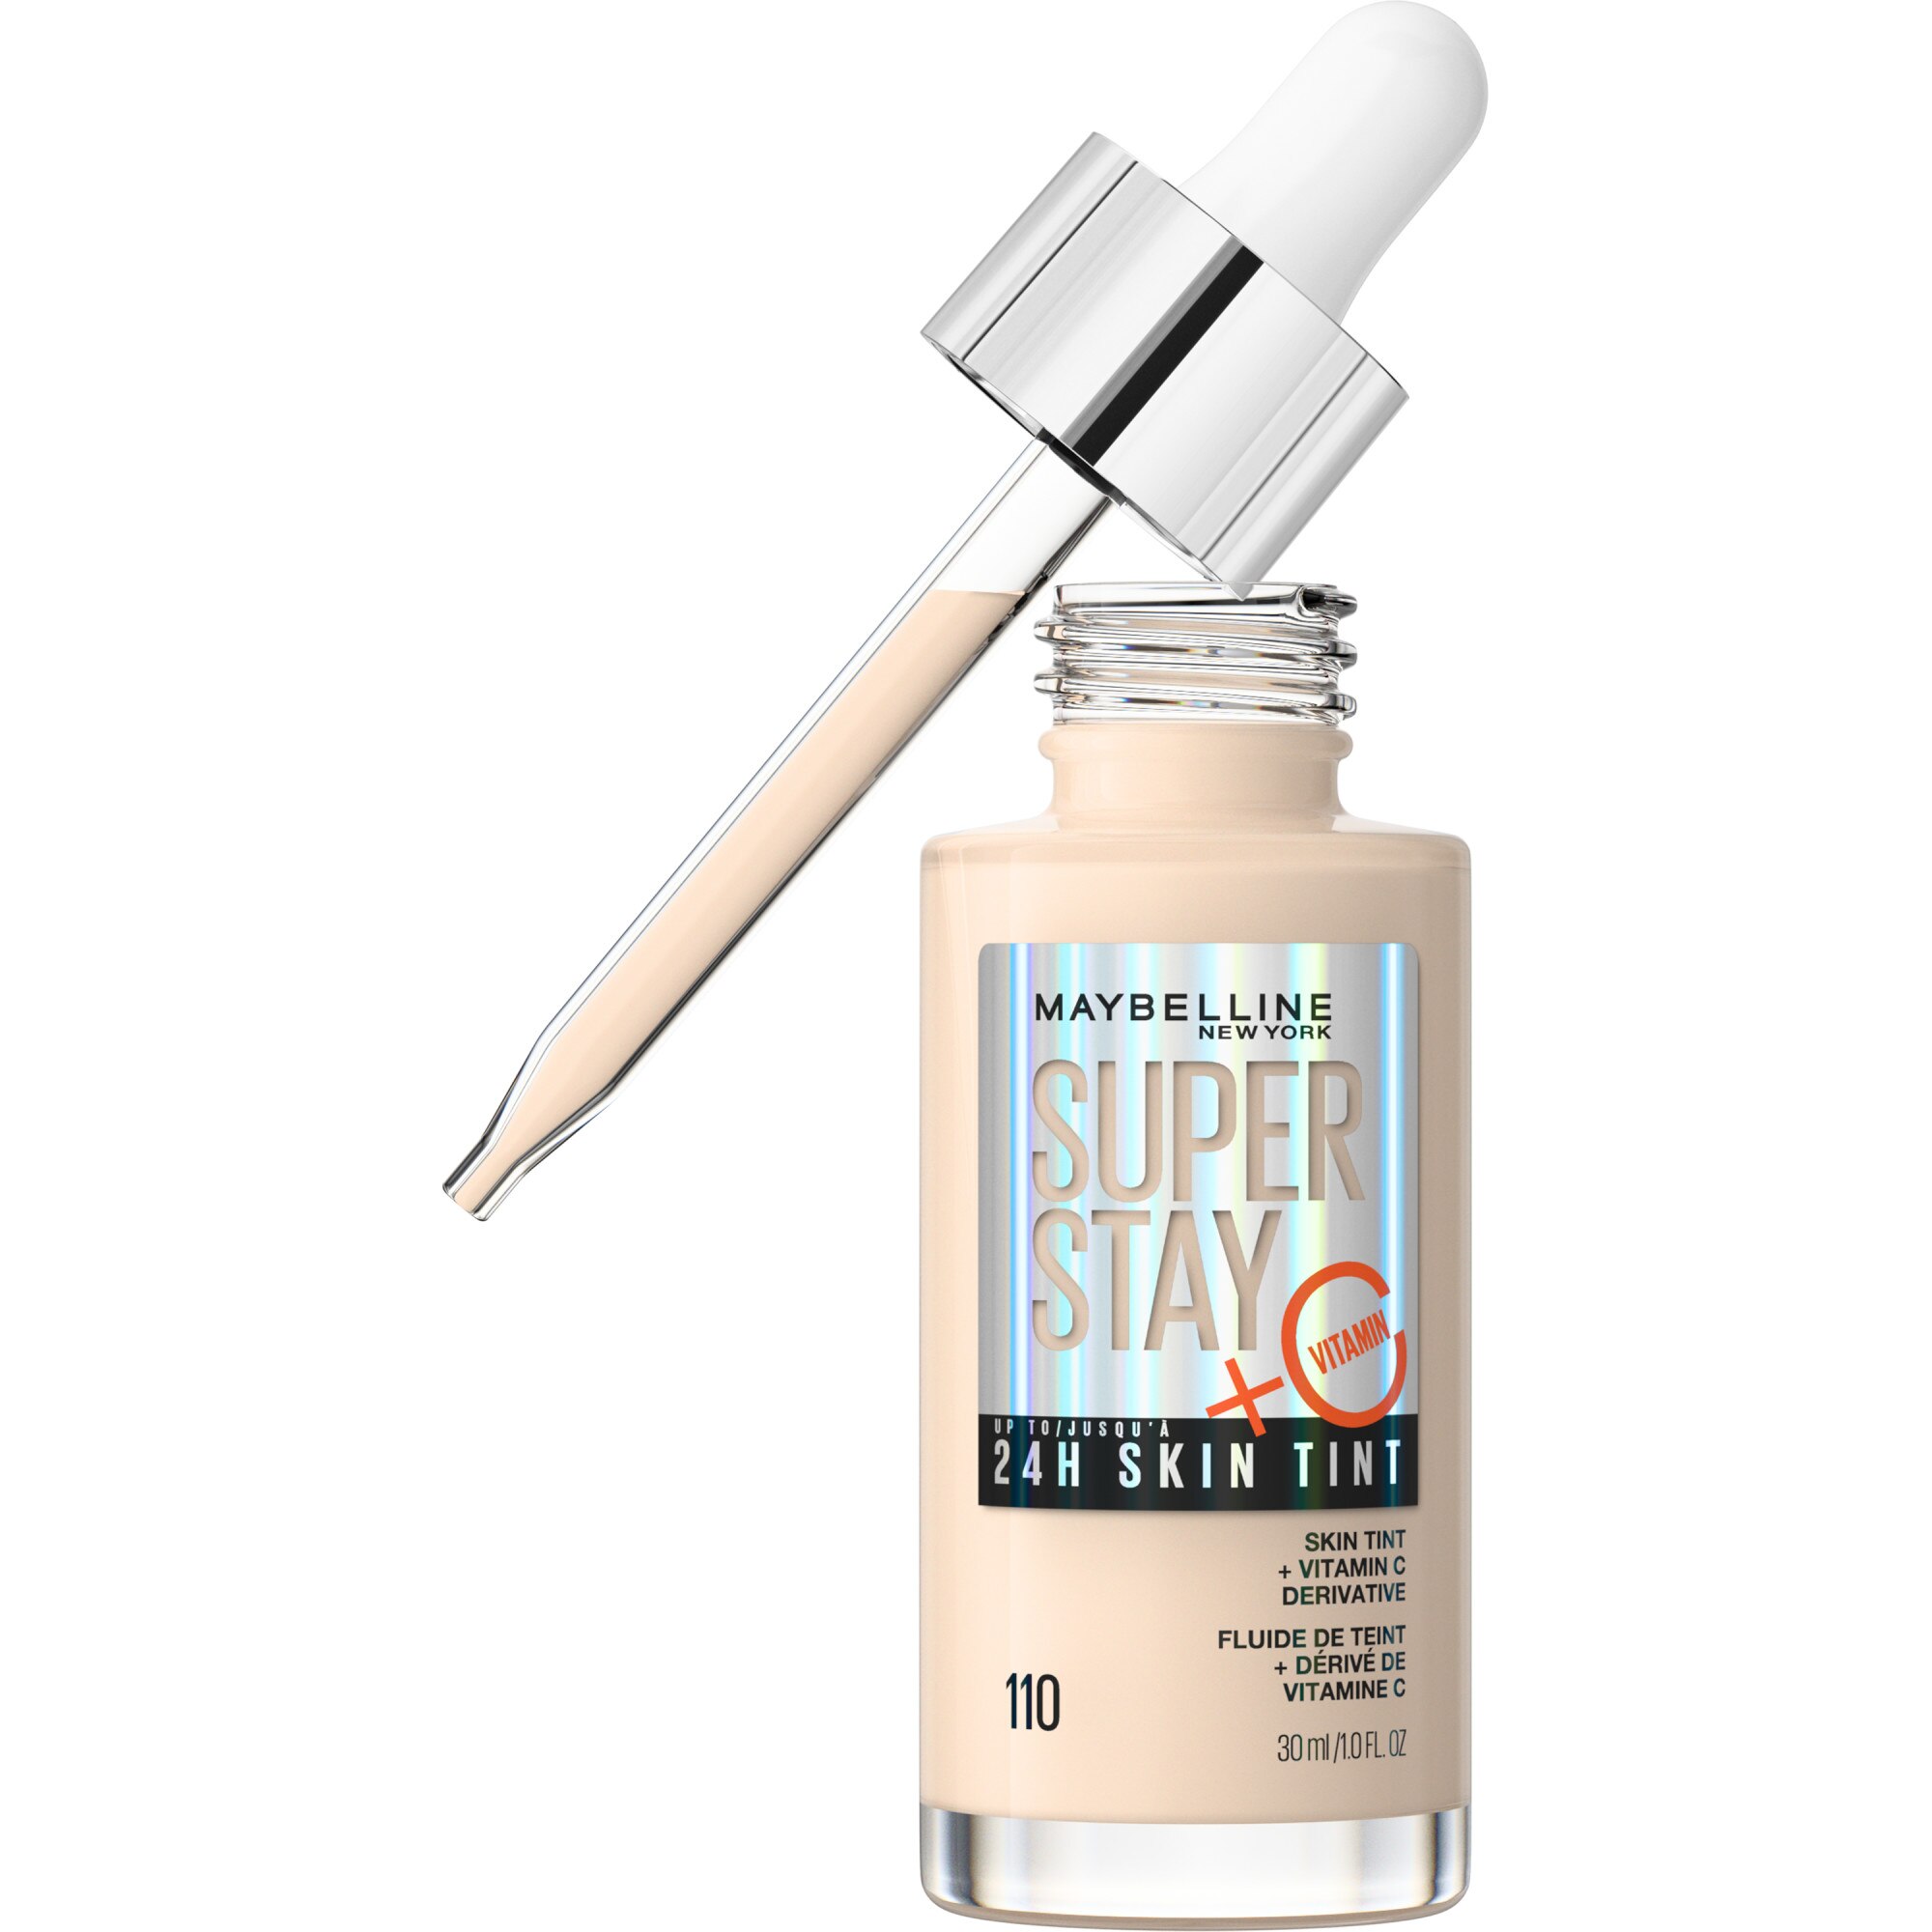 Maybelline New York Super Stay Up To 24HR Skin Tint With Vitamin C, 110, 1 Oz , CVS